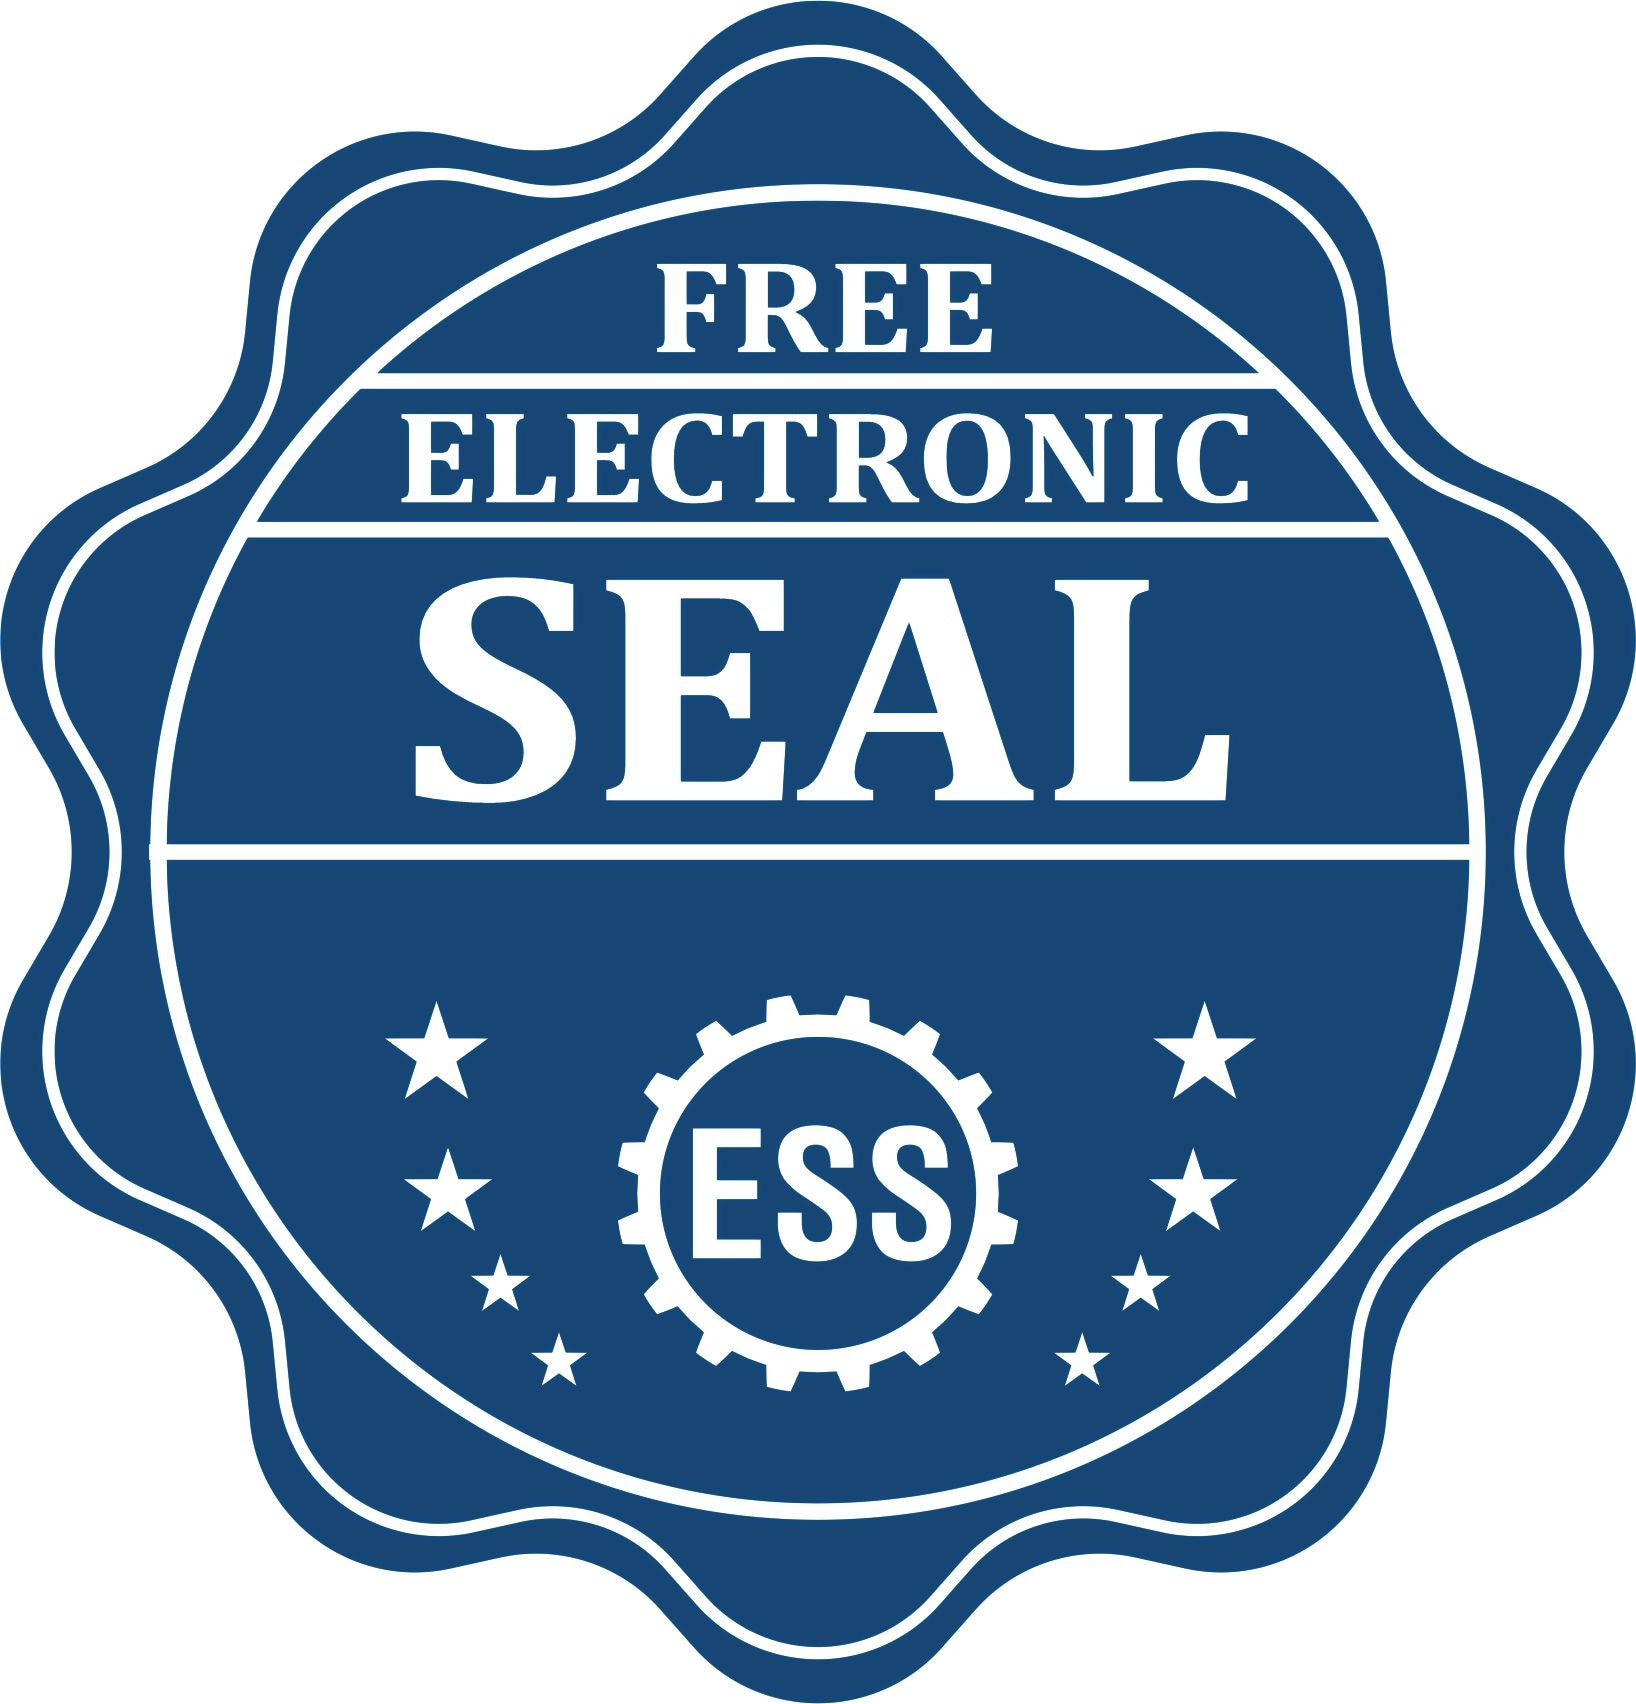 A badge showing a free electronic seal for the State of Rhode Island Long Reach Architectural Embossing Seal with stars and the ESS gear on the emblem.